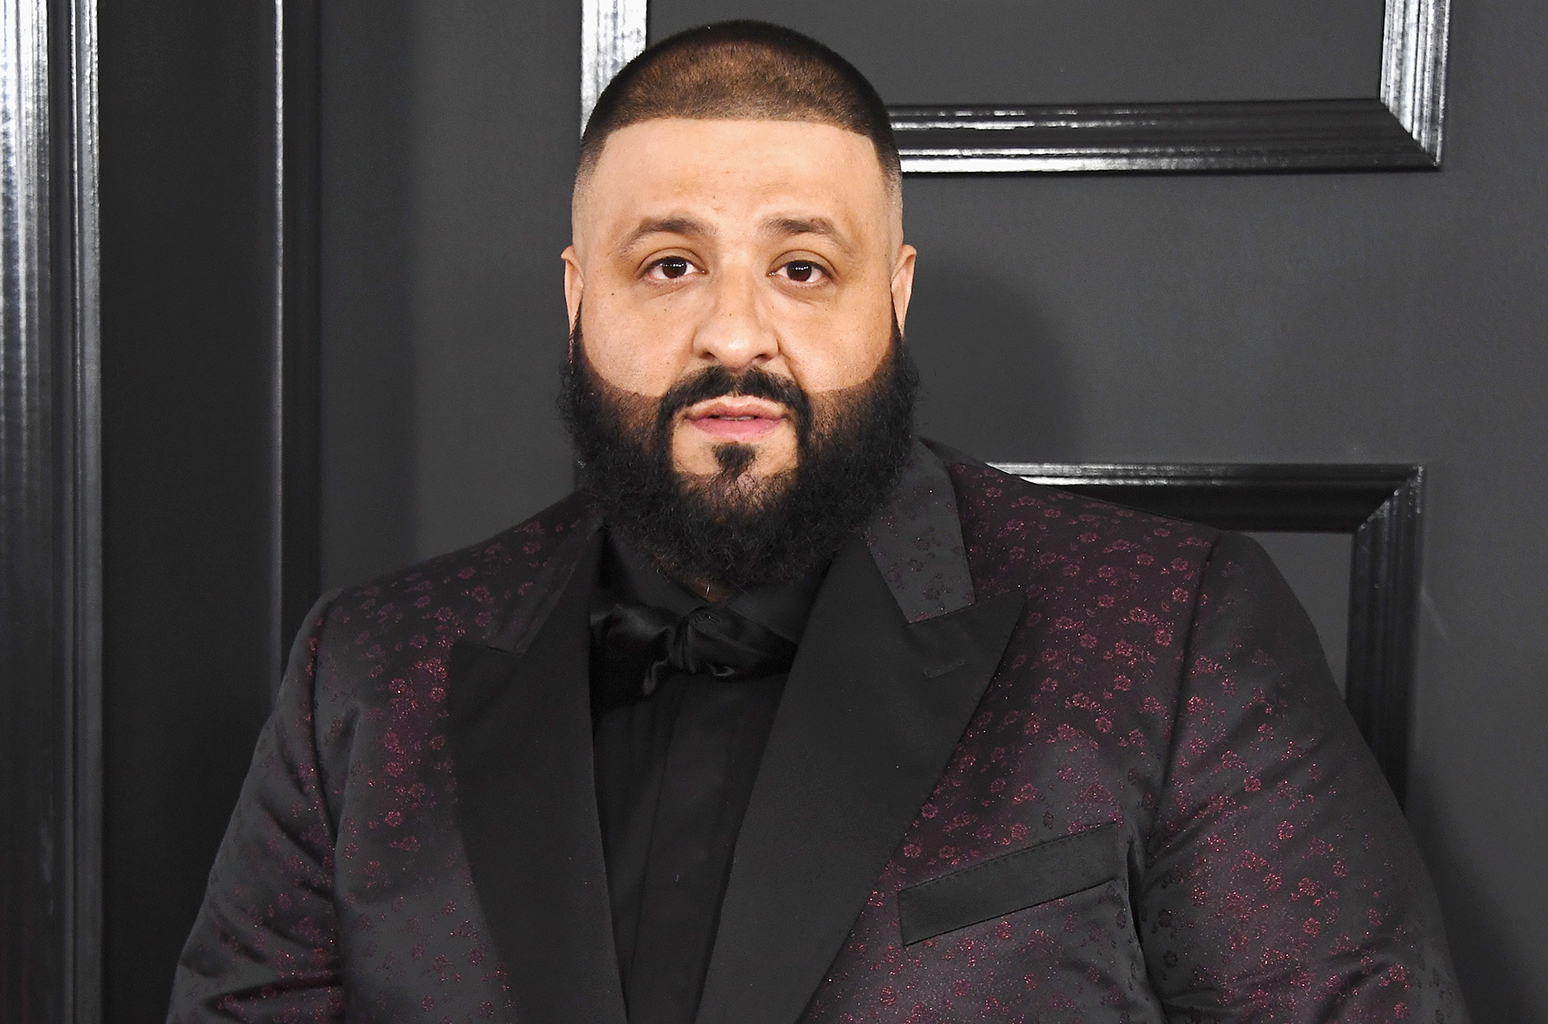 dj-khaled-is-selling-his-clothes-to-help-high-schoolers-the-source